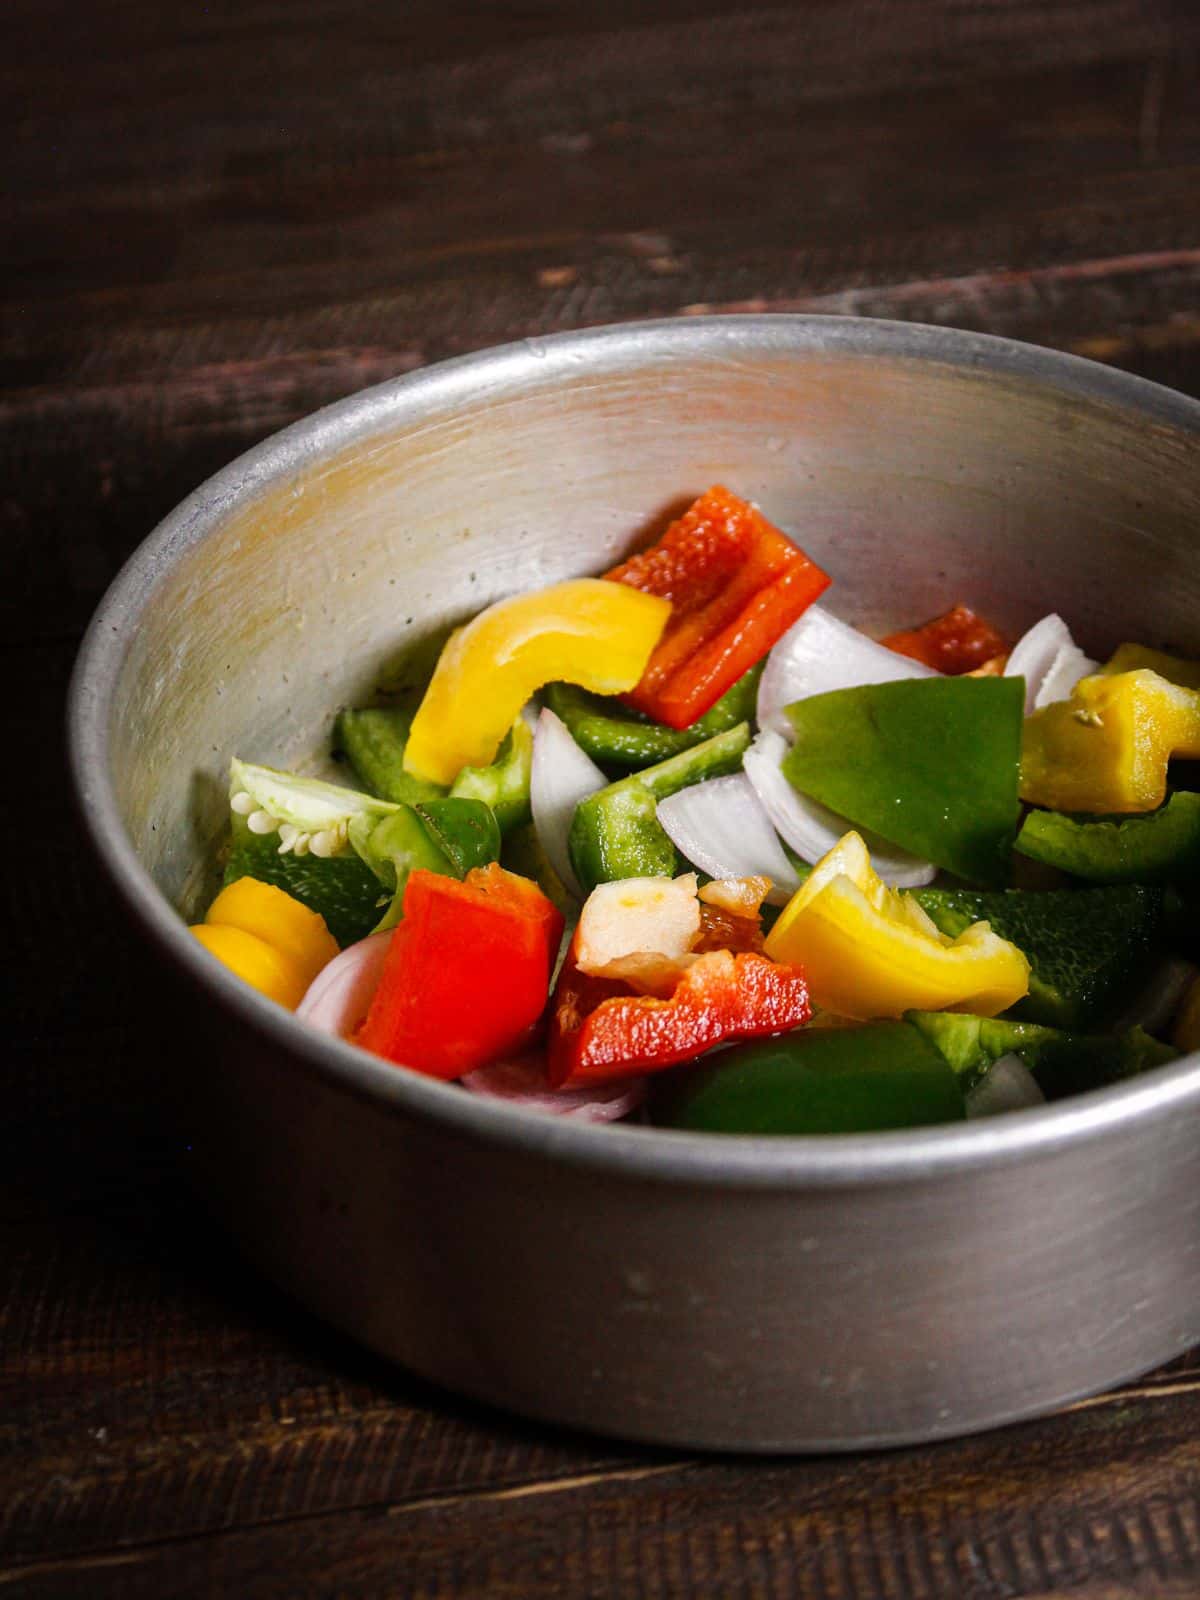 Take chopped vegetables in a vessel